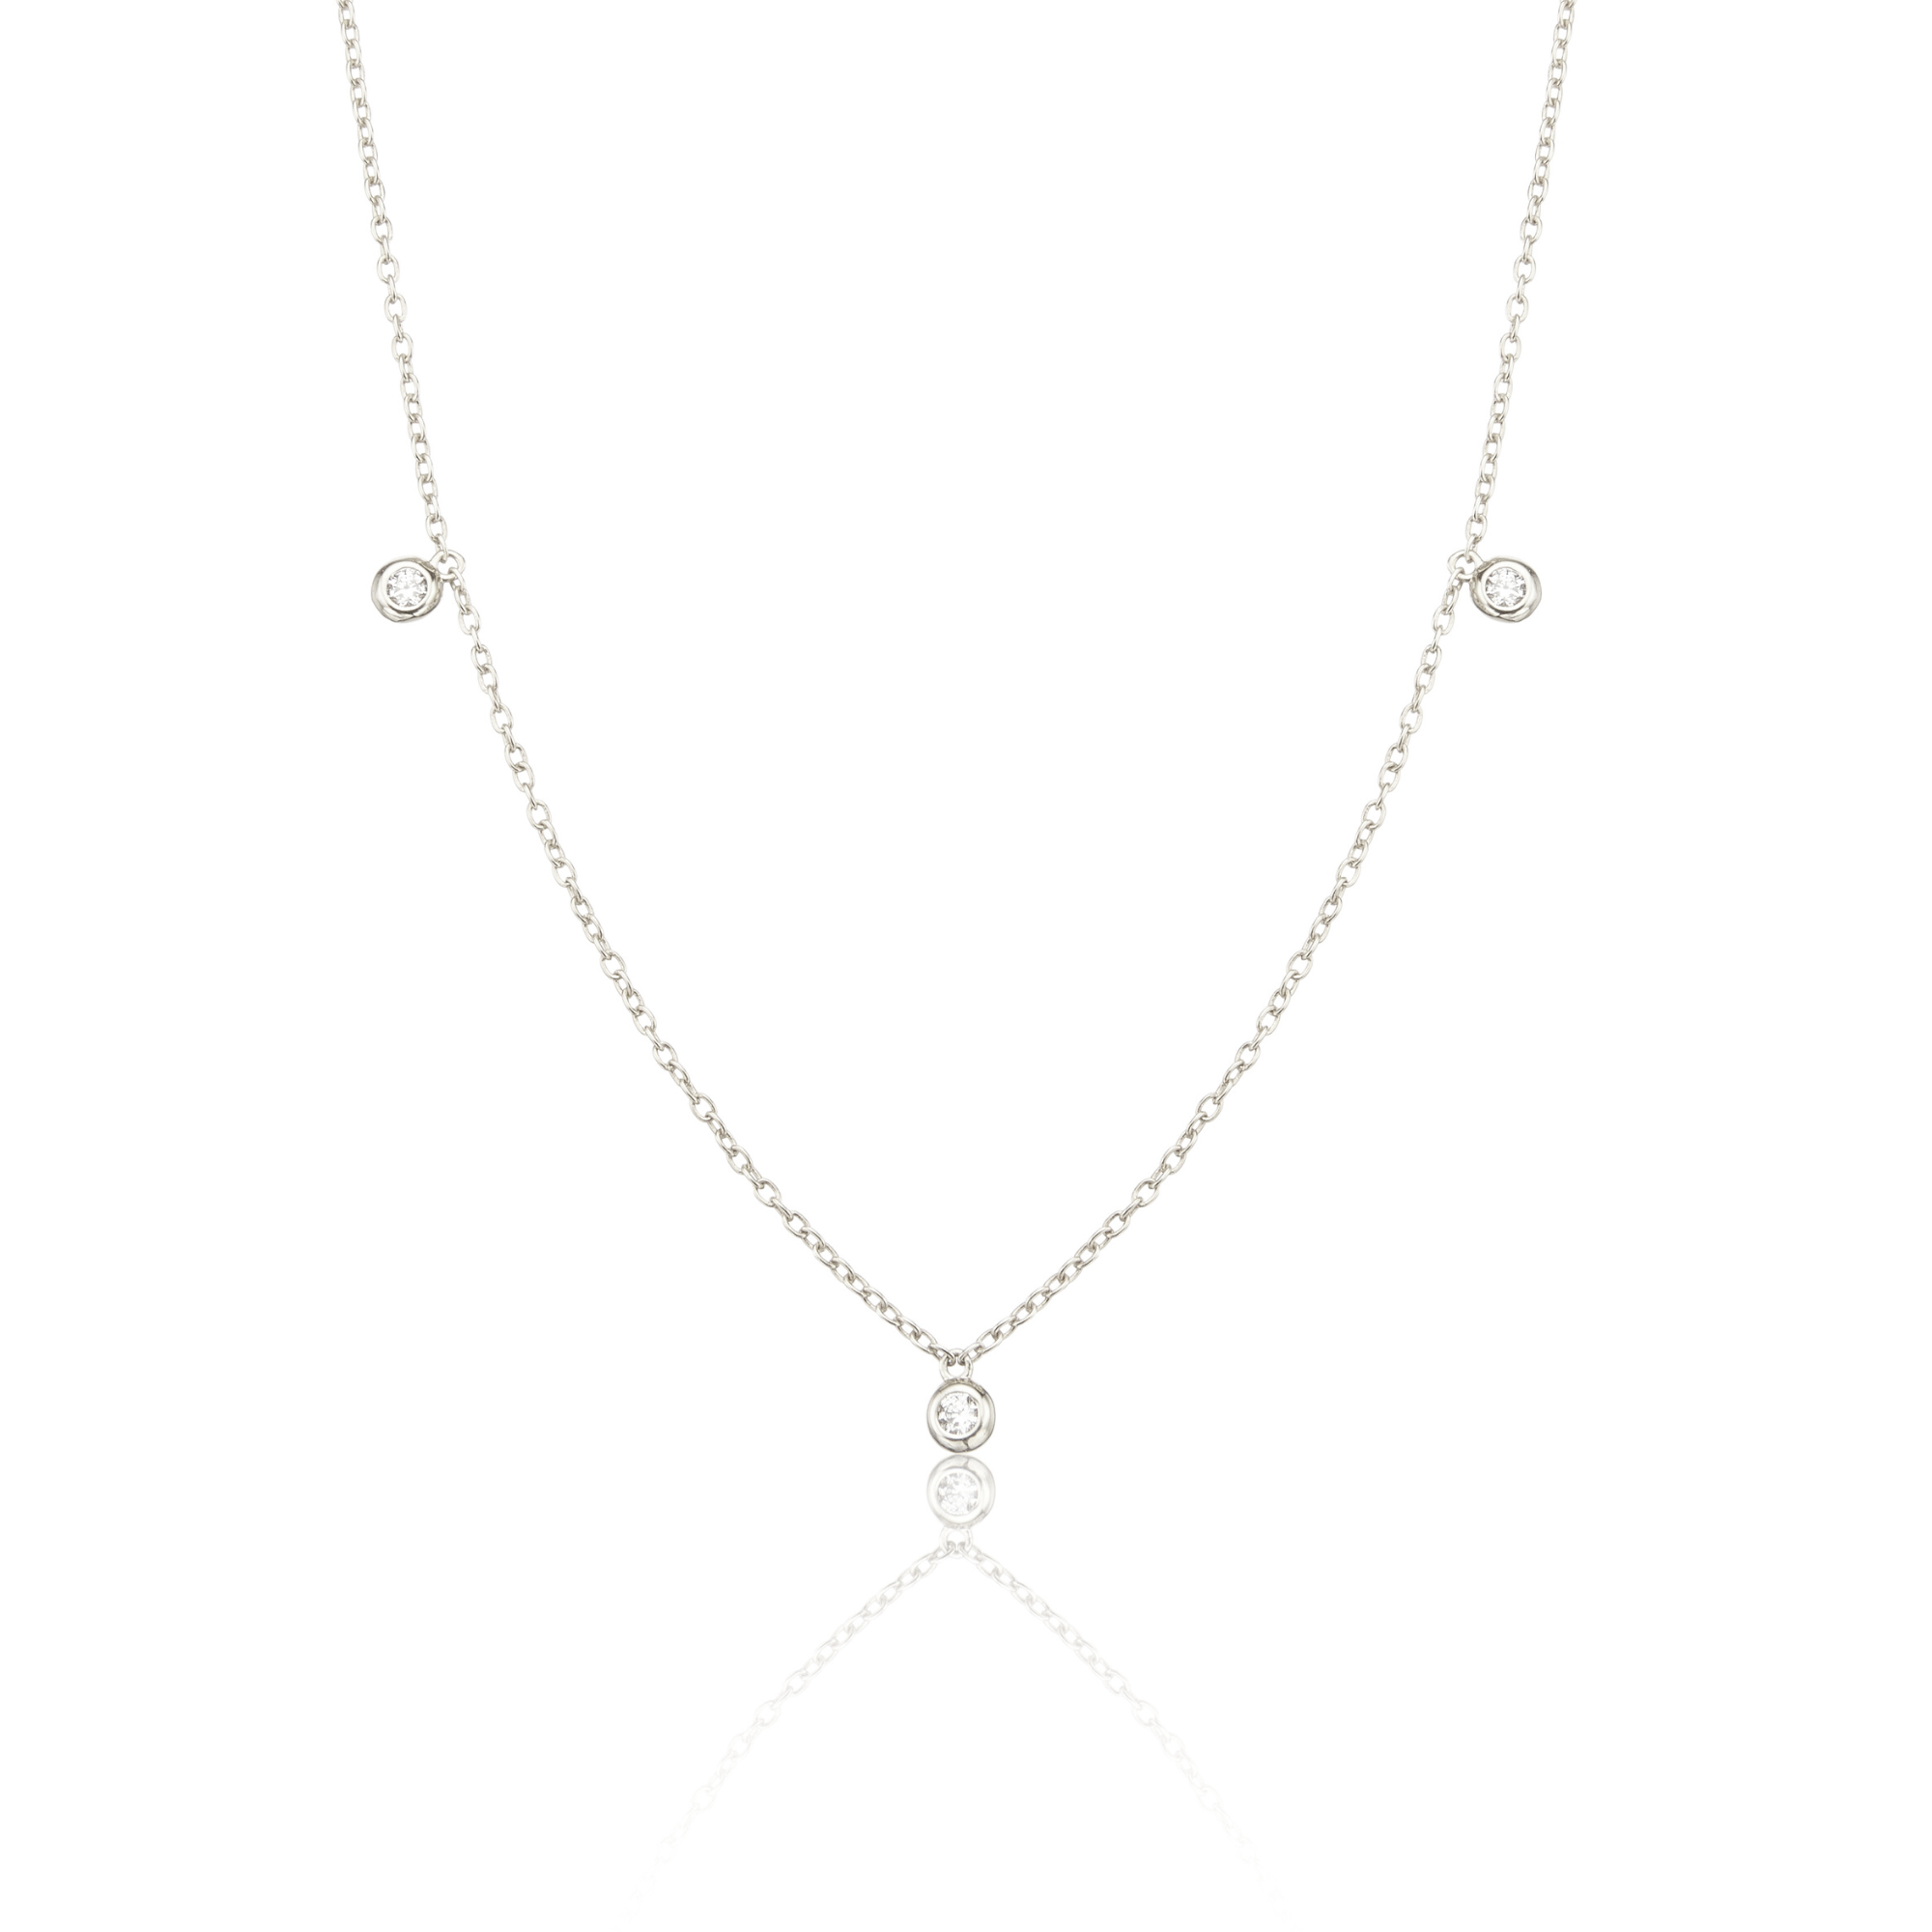 Solid White Gold Diamond Drop Necklace